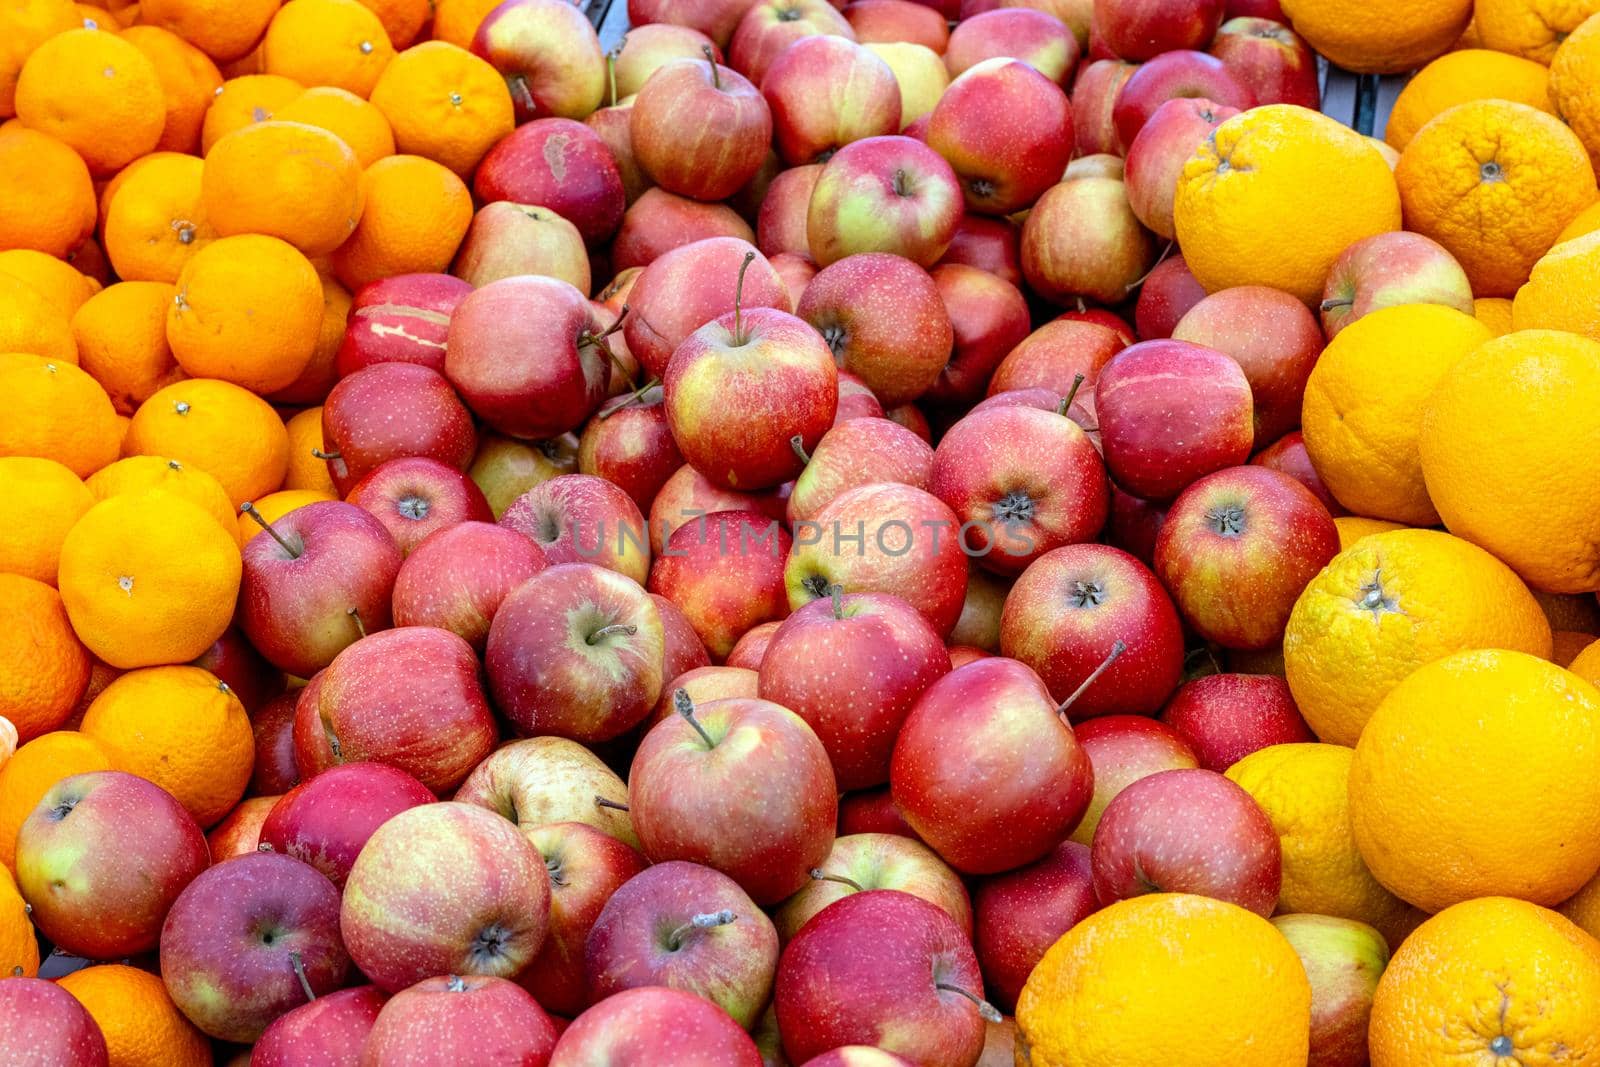 Apples and oranges for sale at a market